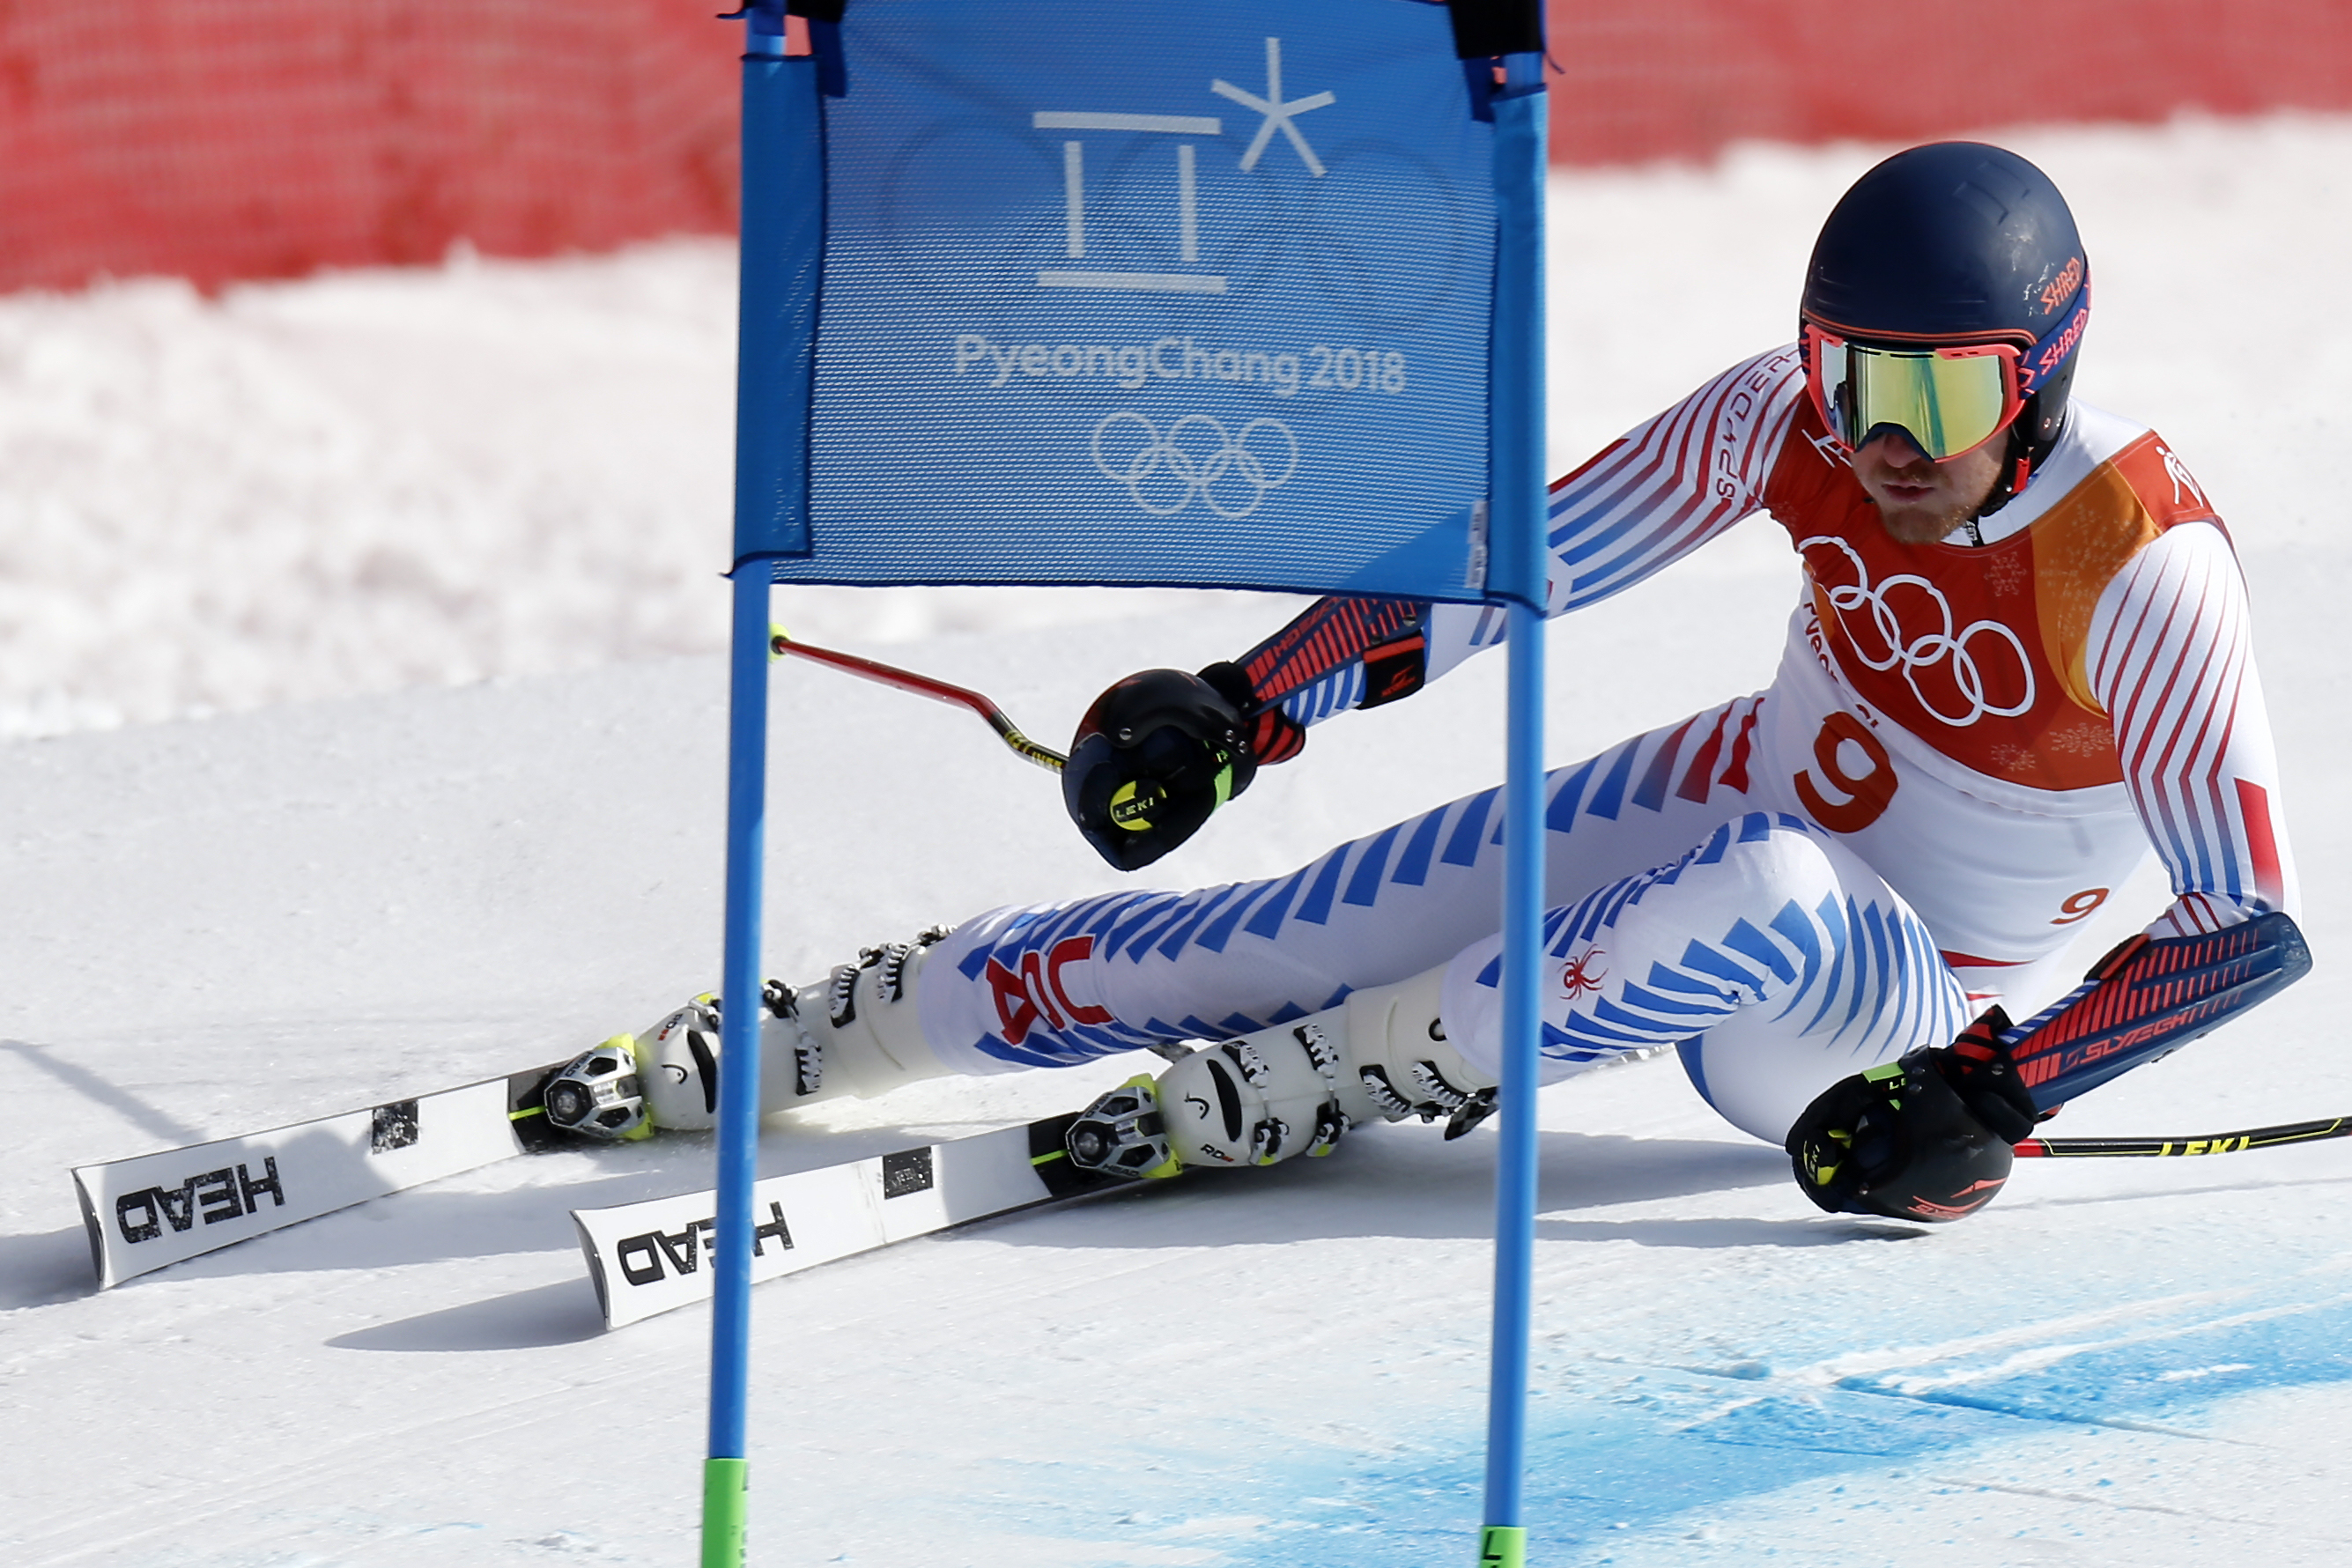 Ted Ligety competes at the Olympics in PyeongChang